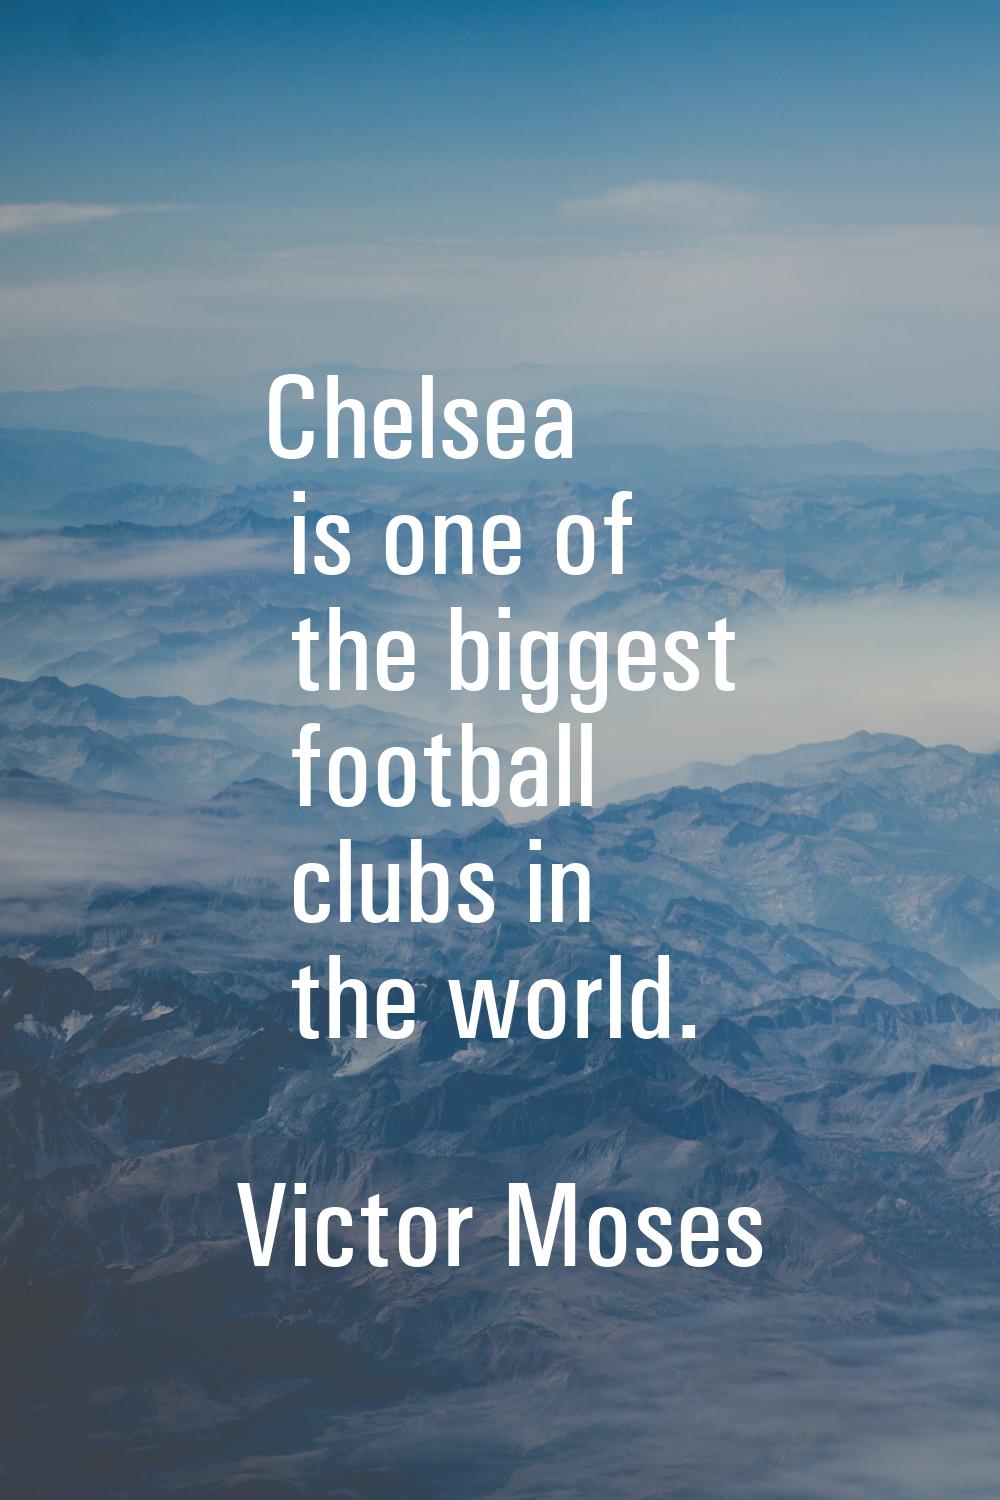 Chelsea is one of the biggest football clubs in the world.